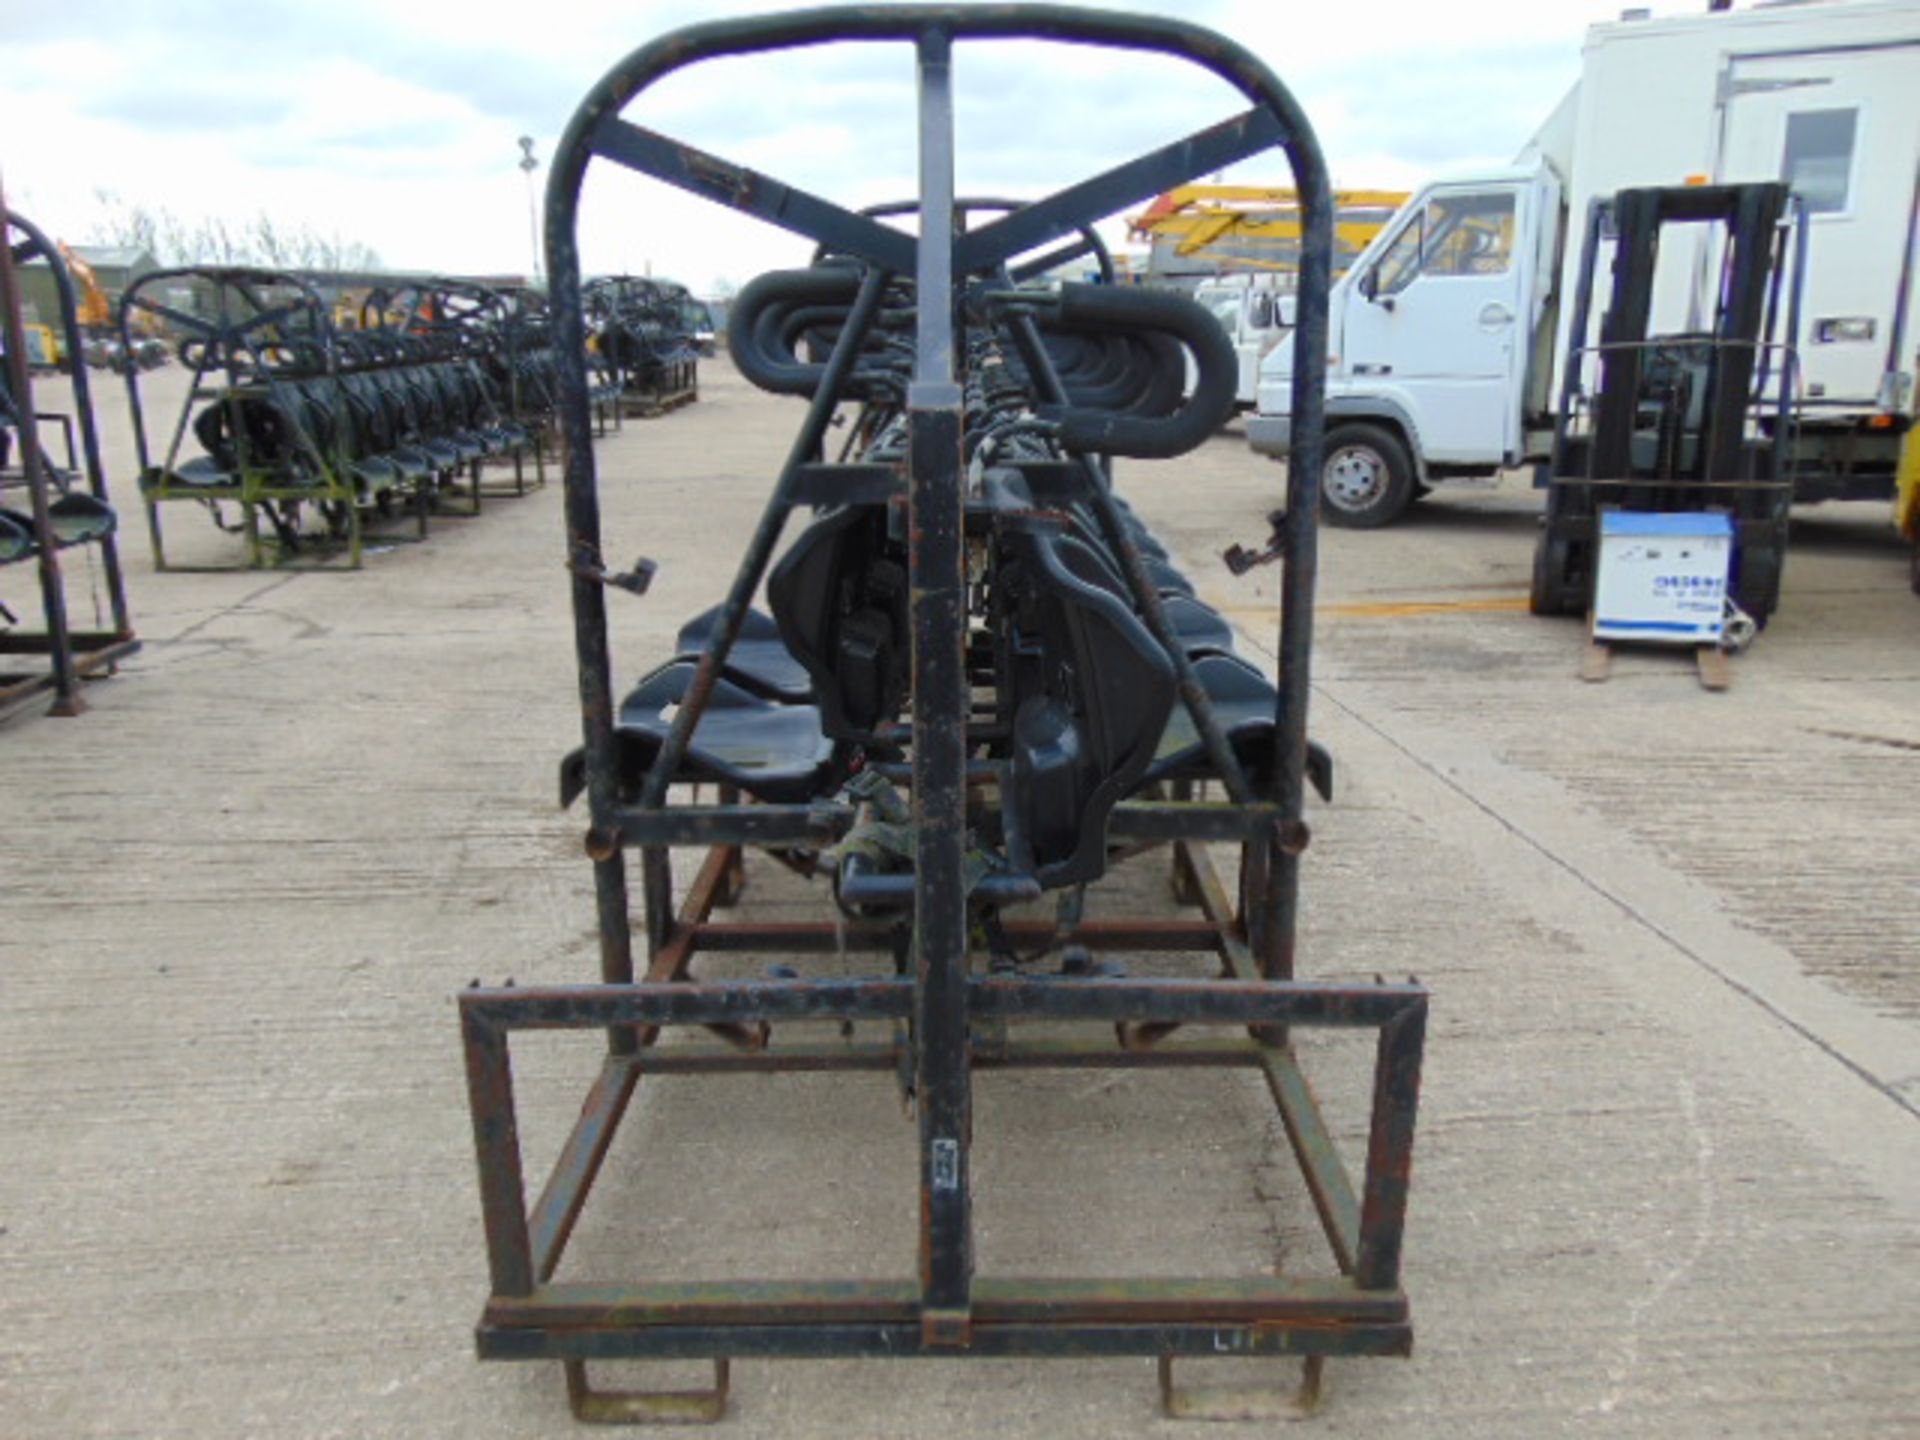 14 Man ROPS Security Seat suitable for Leyland Dafs, Bedfords etc - Image 3 of 5